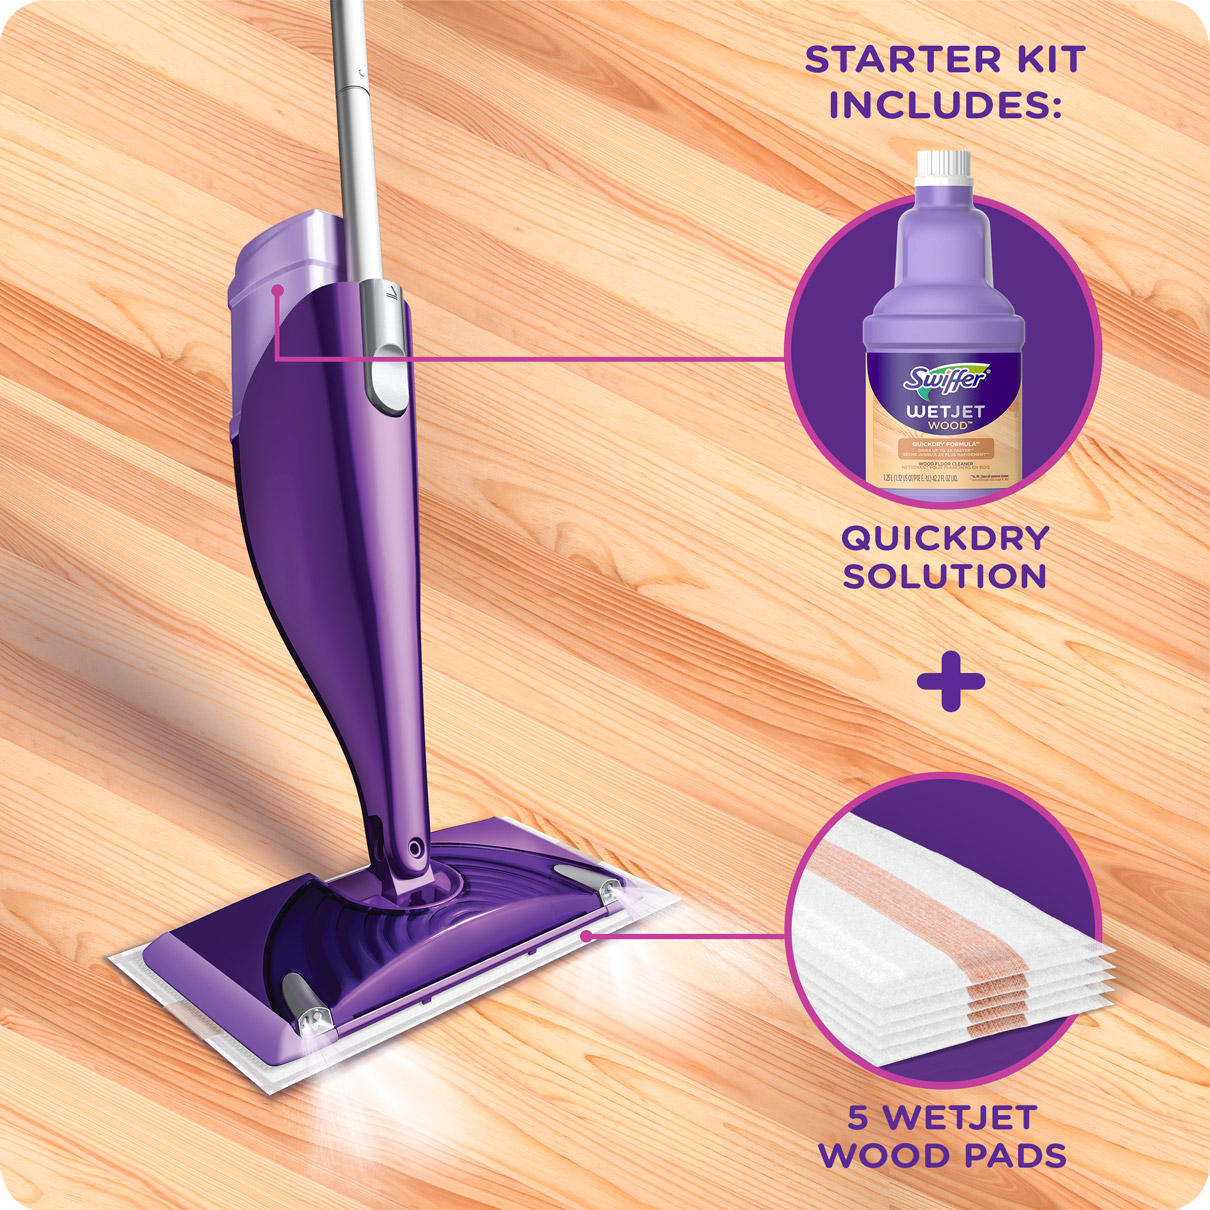 How To Use a Swiffer WetJet 